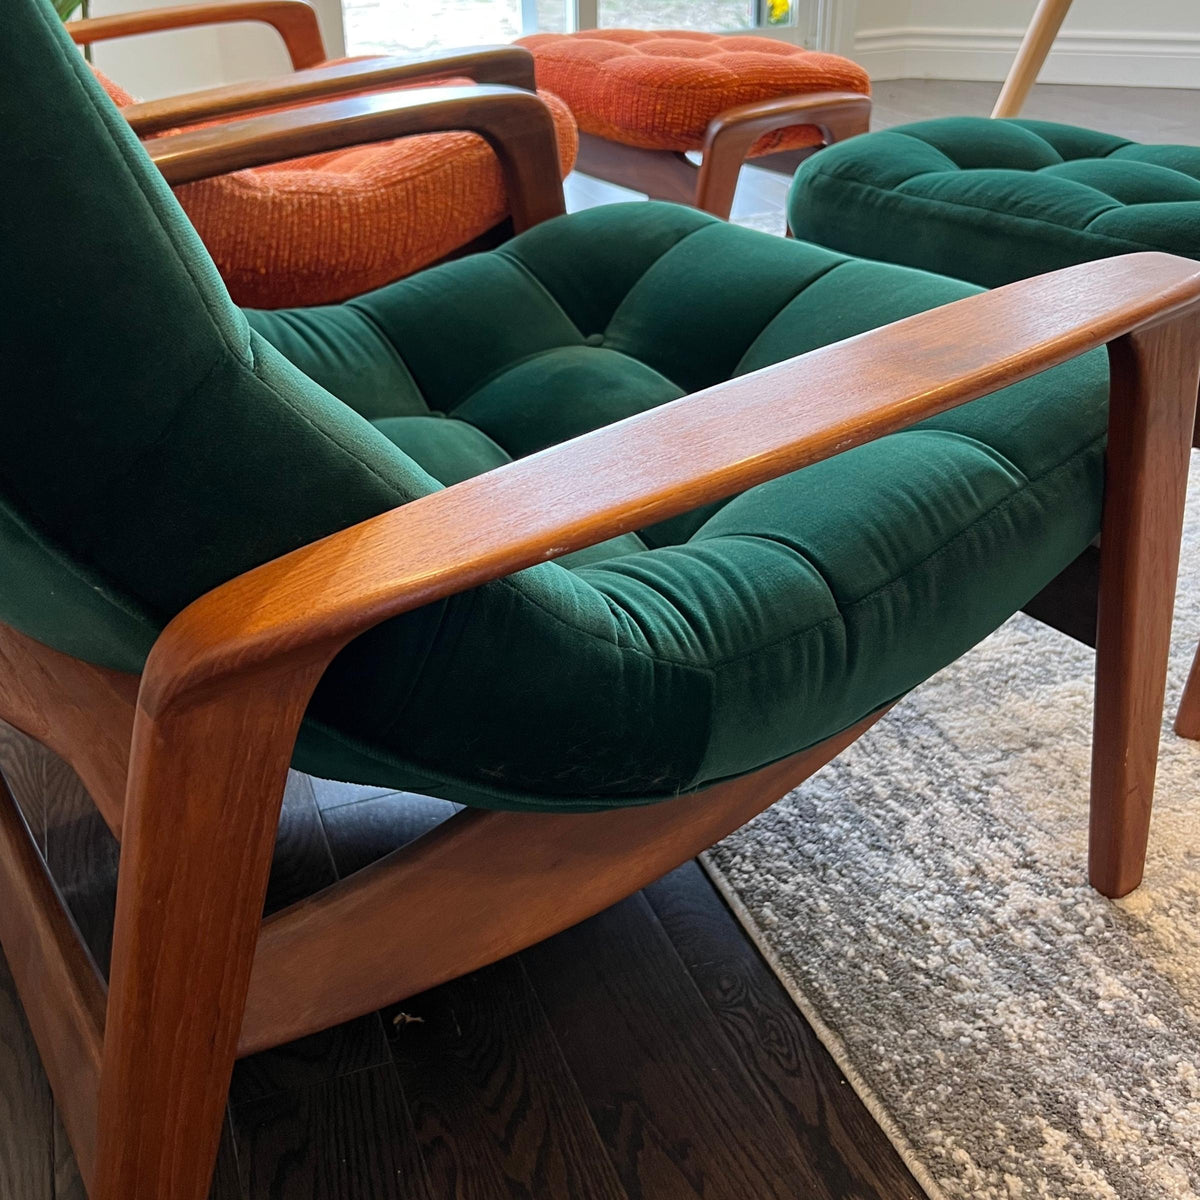 R. Huber Teak Scoop Chair and Ottoman